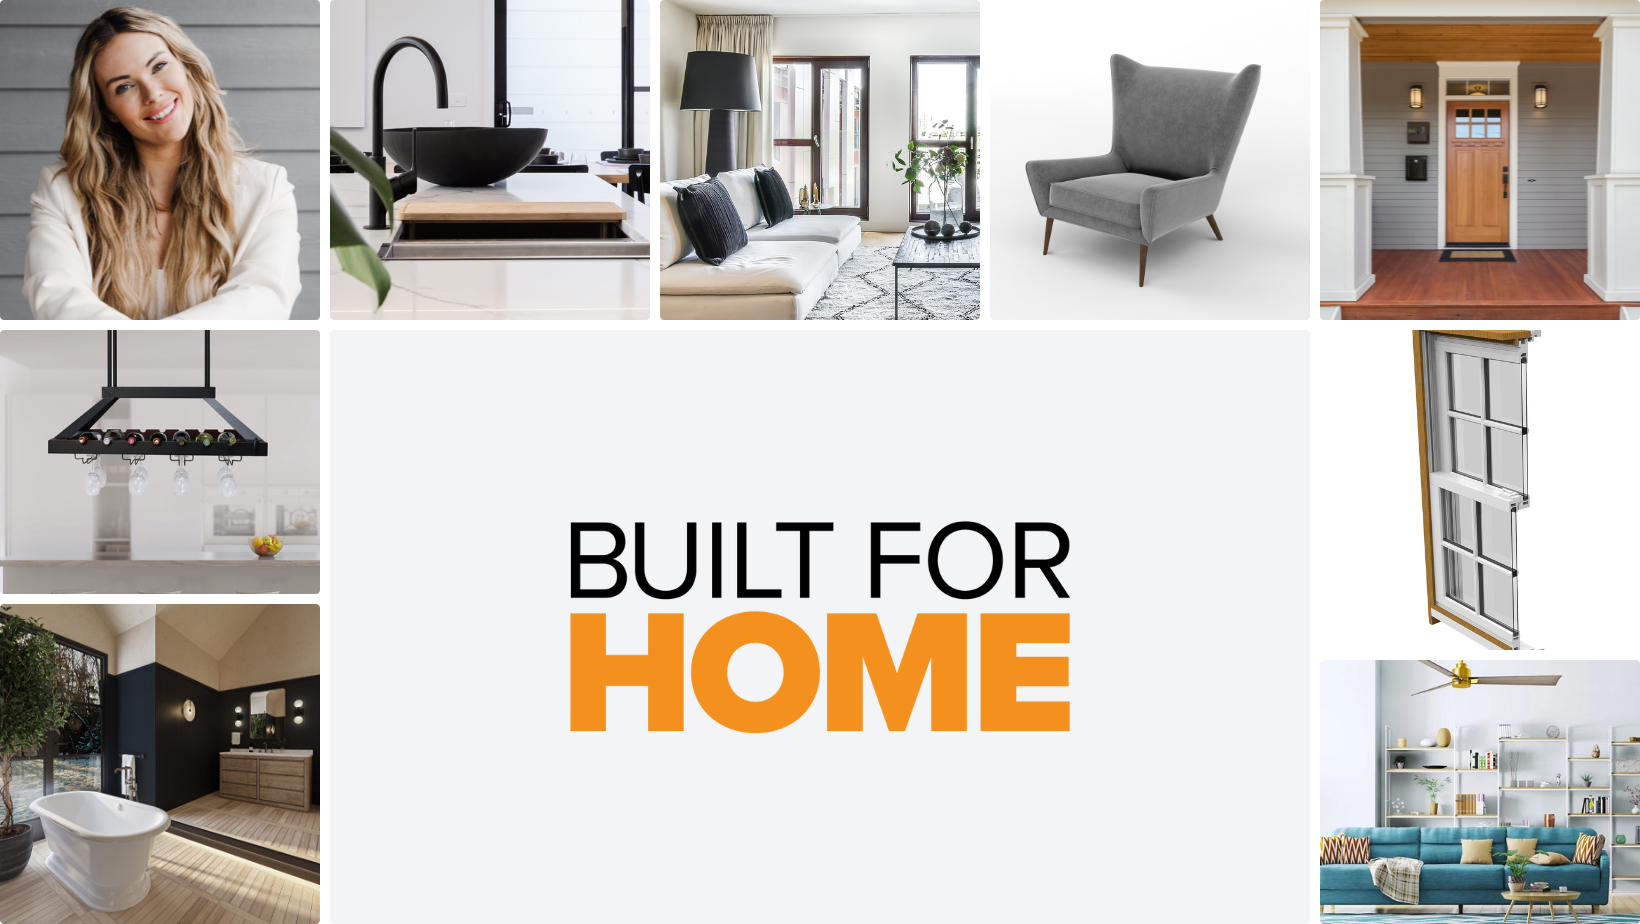 Built for Home Product Guide Listing Image shows multiple home settings and products for ideas and inspiration.